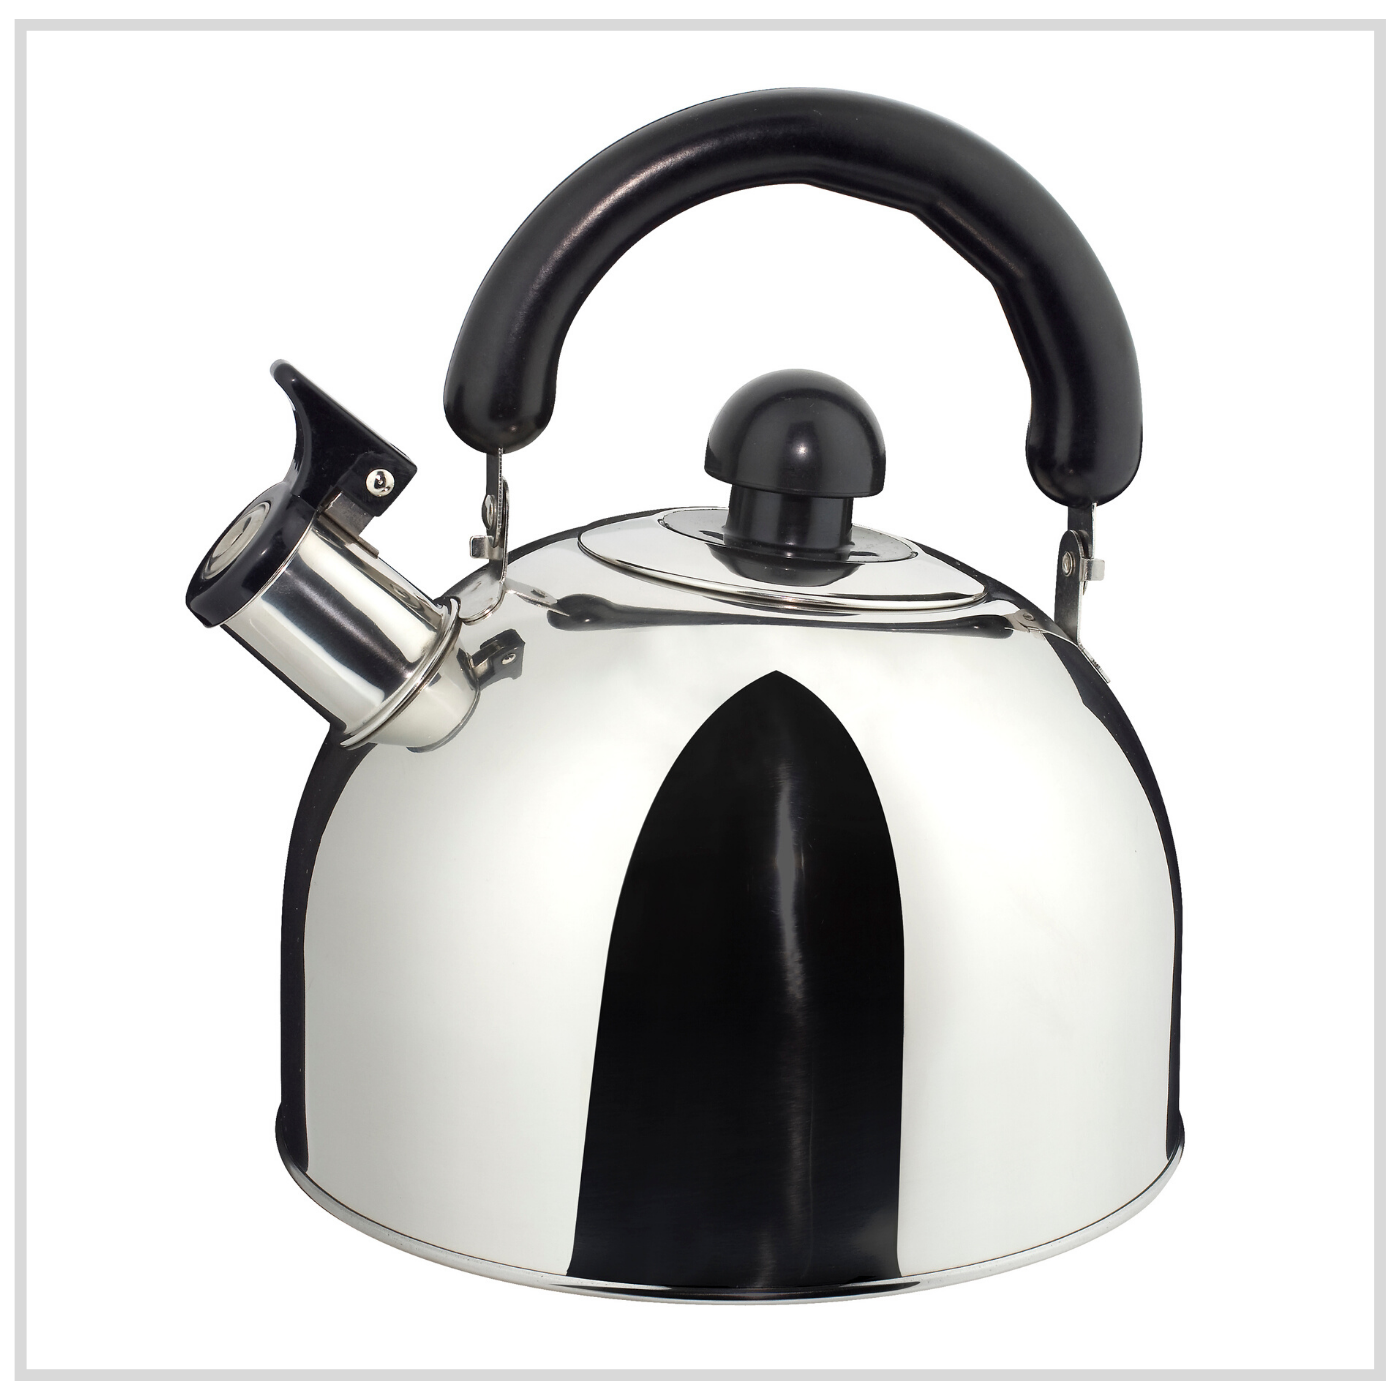 Ilsa Stainless Steel Whistling Kettle - 4.5L